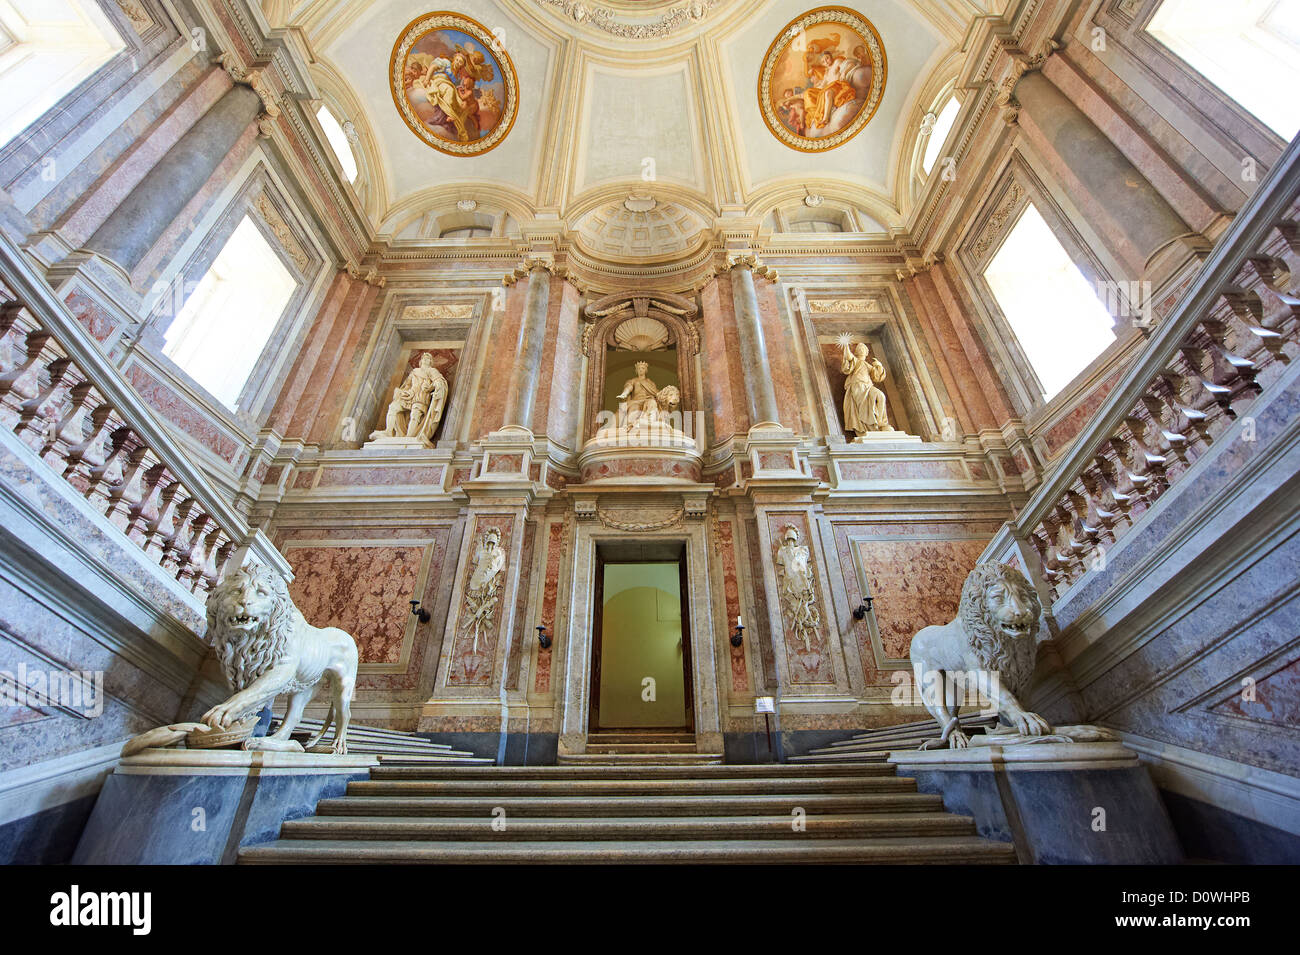 The Baroque Honour Grand Staircase entrance to the Bourbon Kings of Naples Royal Palace of Caserta, Italy.  Stock Photo